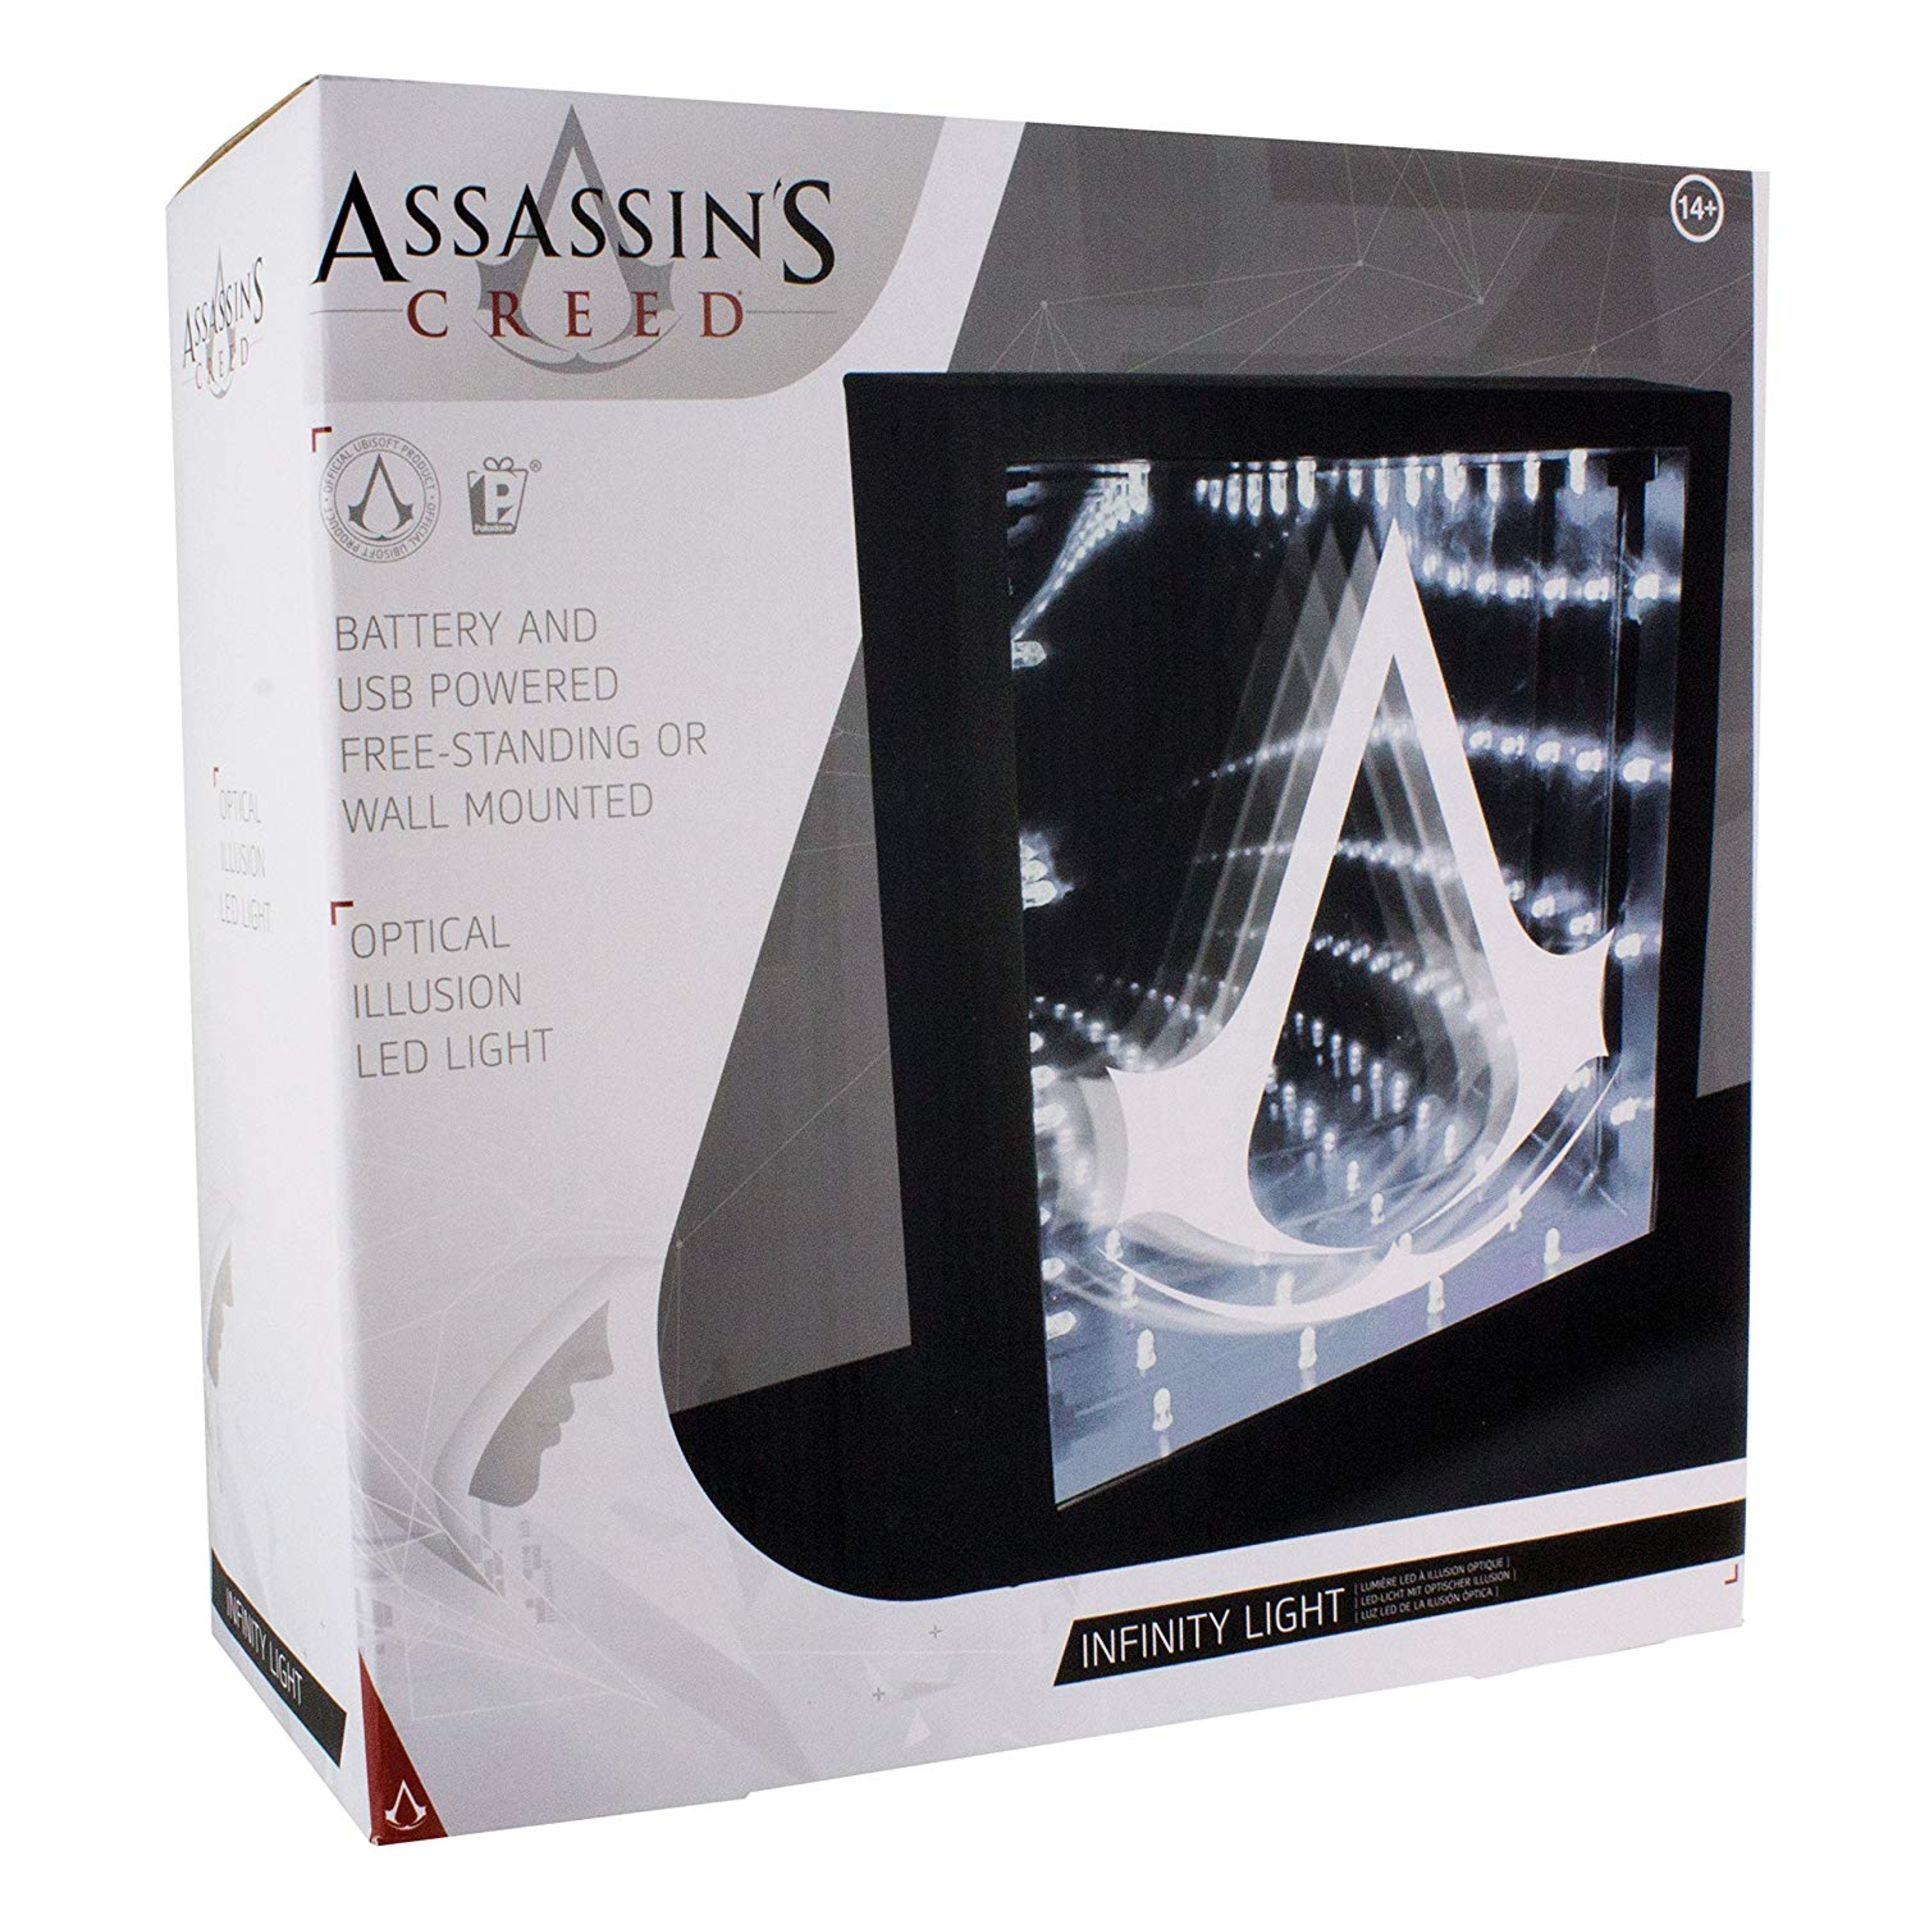 10pcs Brand new Sealed Assasins Creed Inifinity light - comes with USB charger lead & battery option